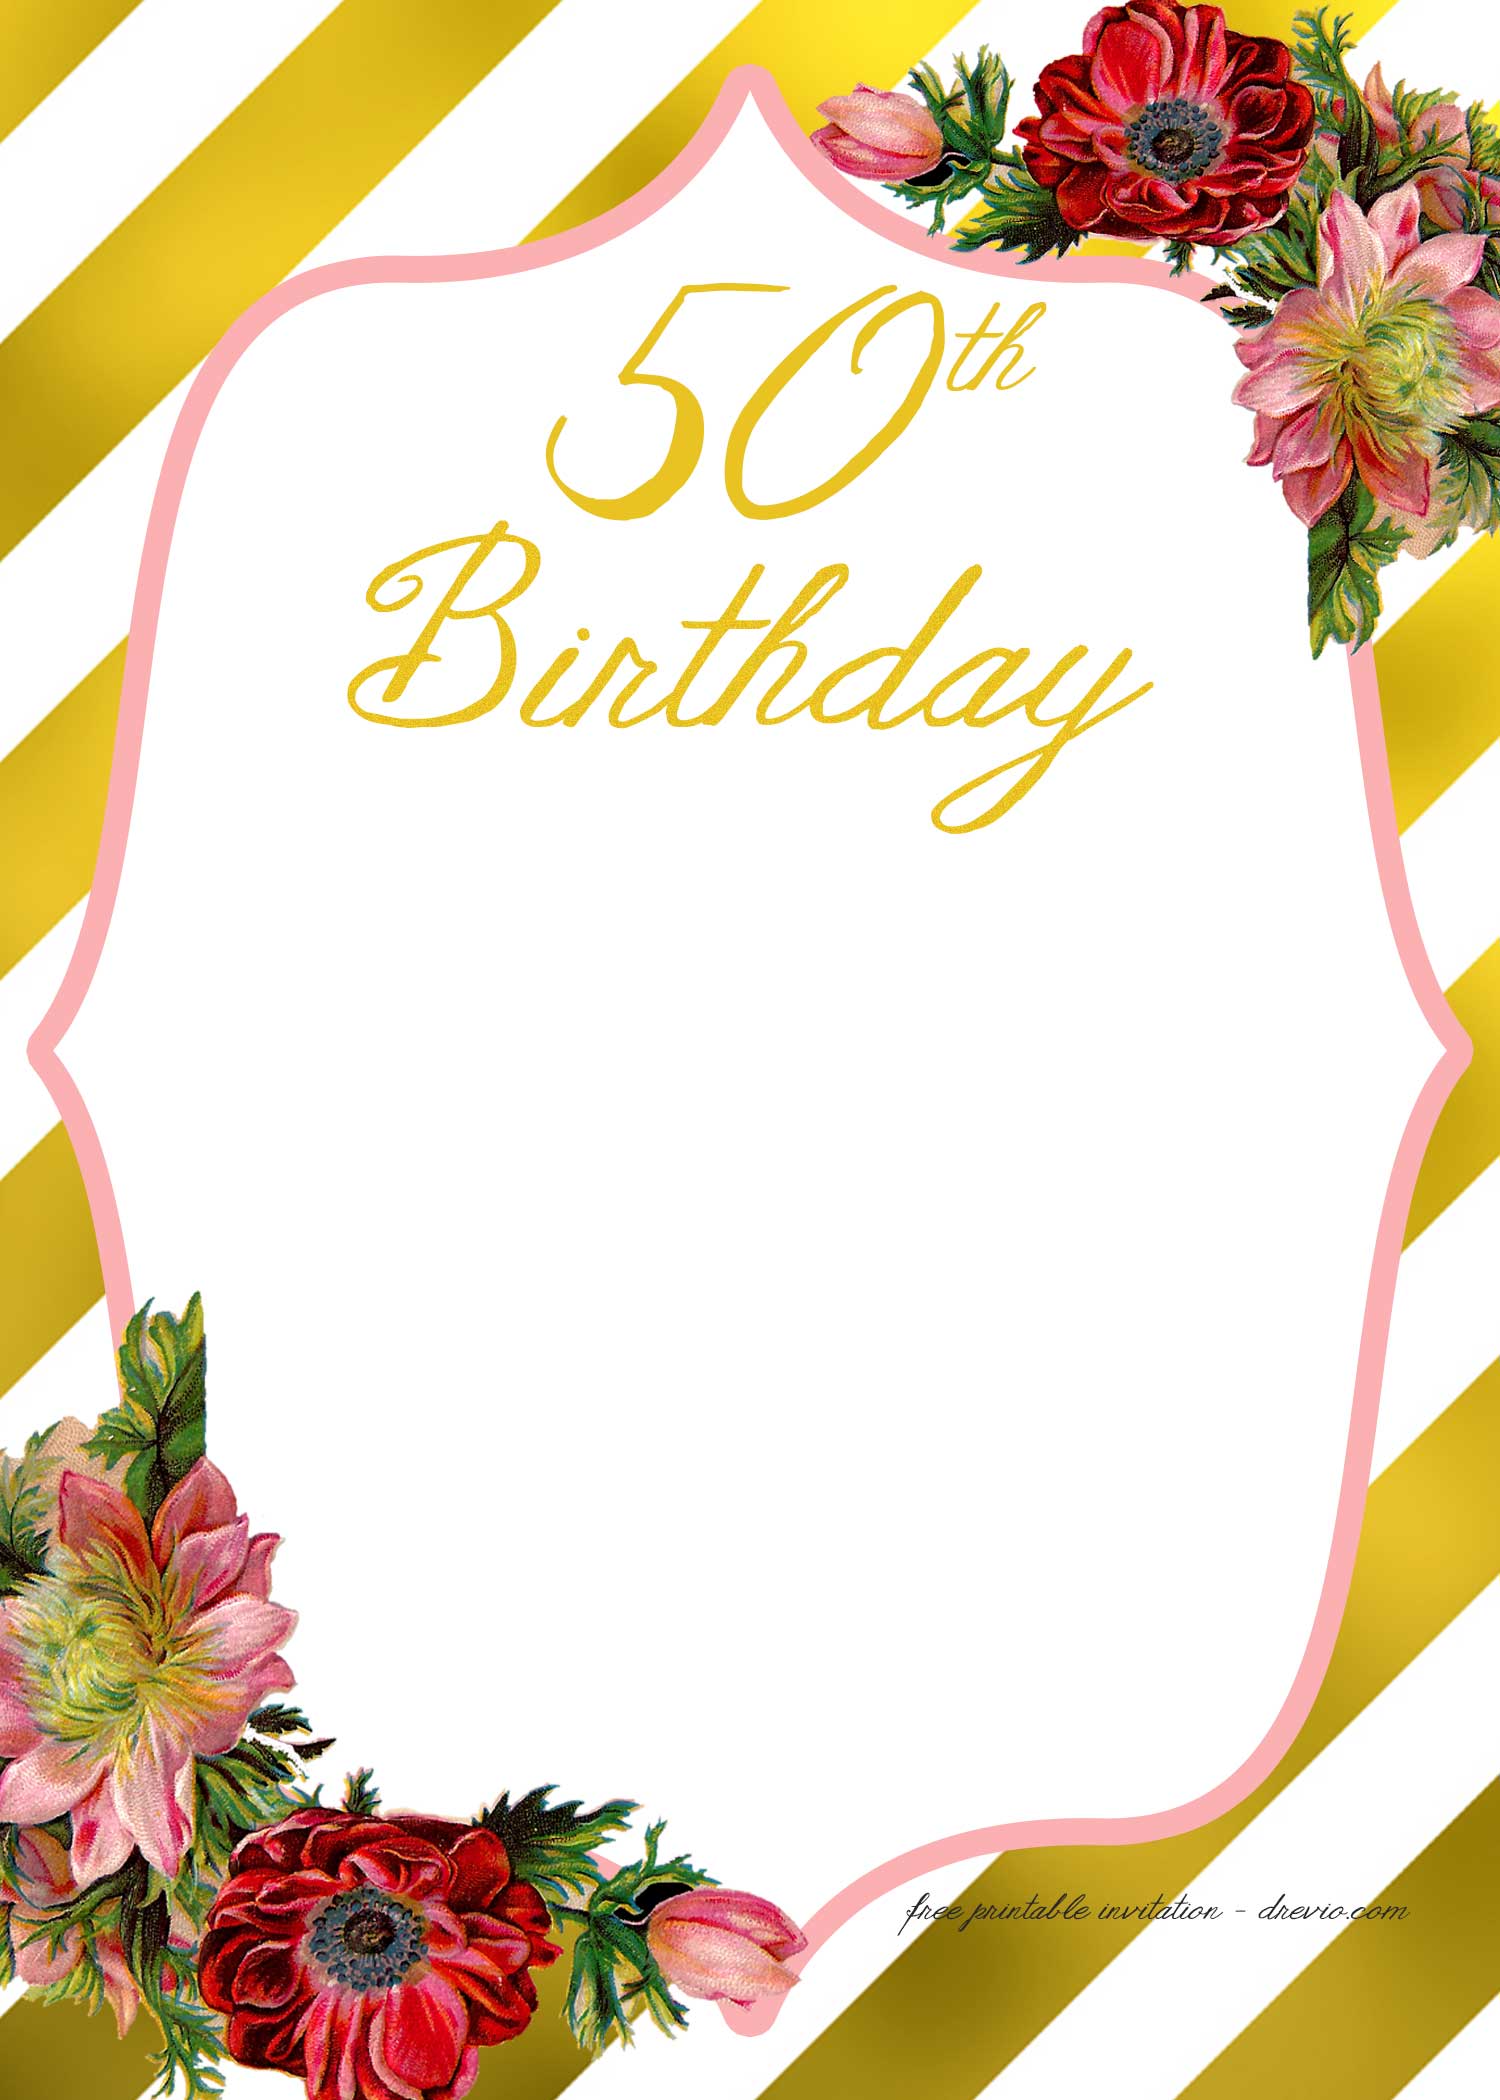 Adult Birthday Invitations Template For 50th Years Old And Up DREVIO